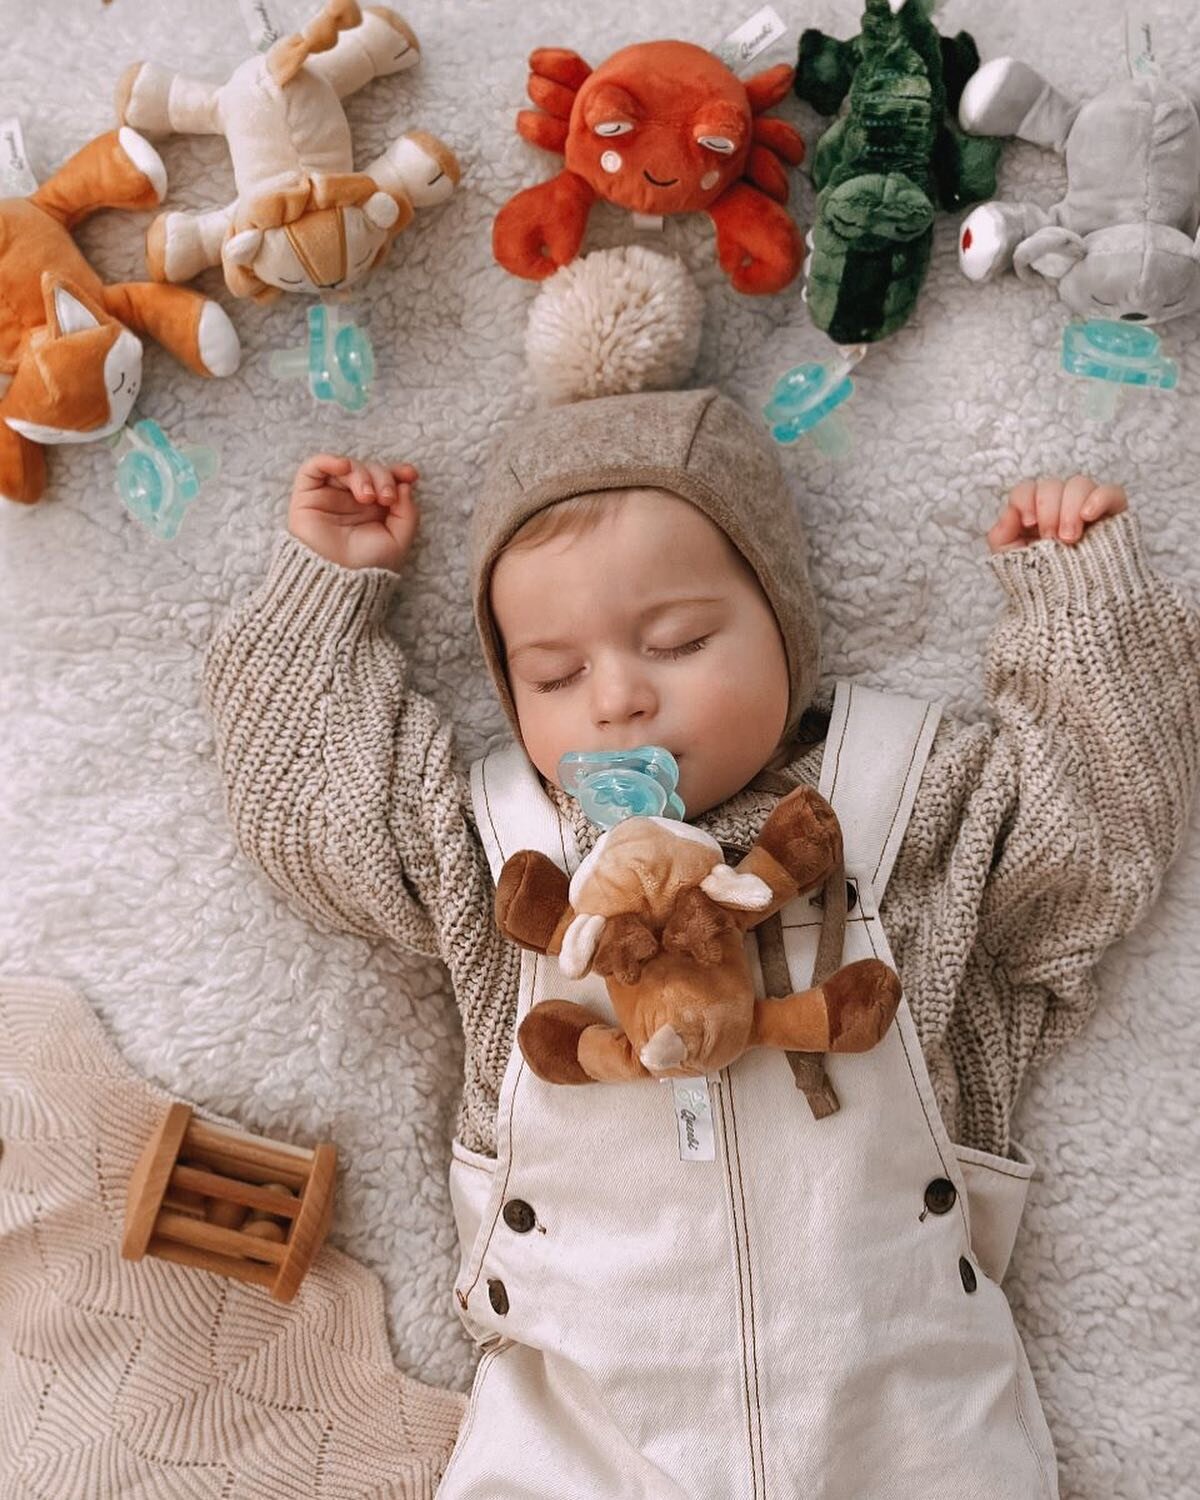 The perfect sleeping companion
.
Come with 6 different characters
.
Check them out at www.queebi.com
.
Thanks @notopa for this beautiful picture ❤️❤️
.
#queebibaby #queebi #babyphotography #babygiftsaustralia #babyshower #babygift